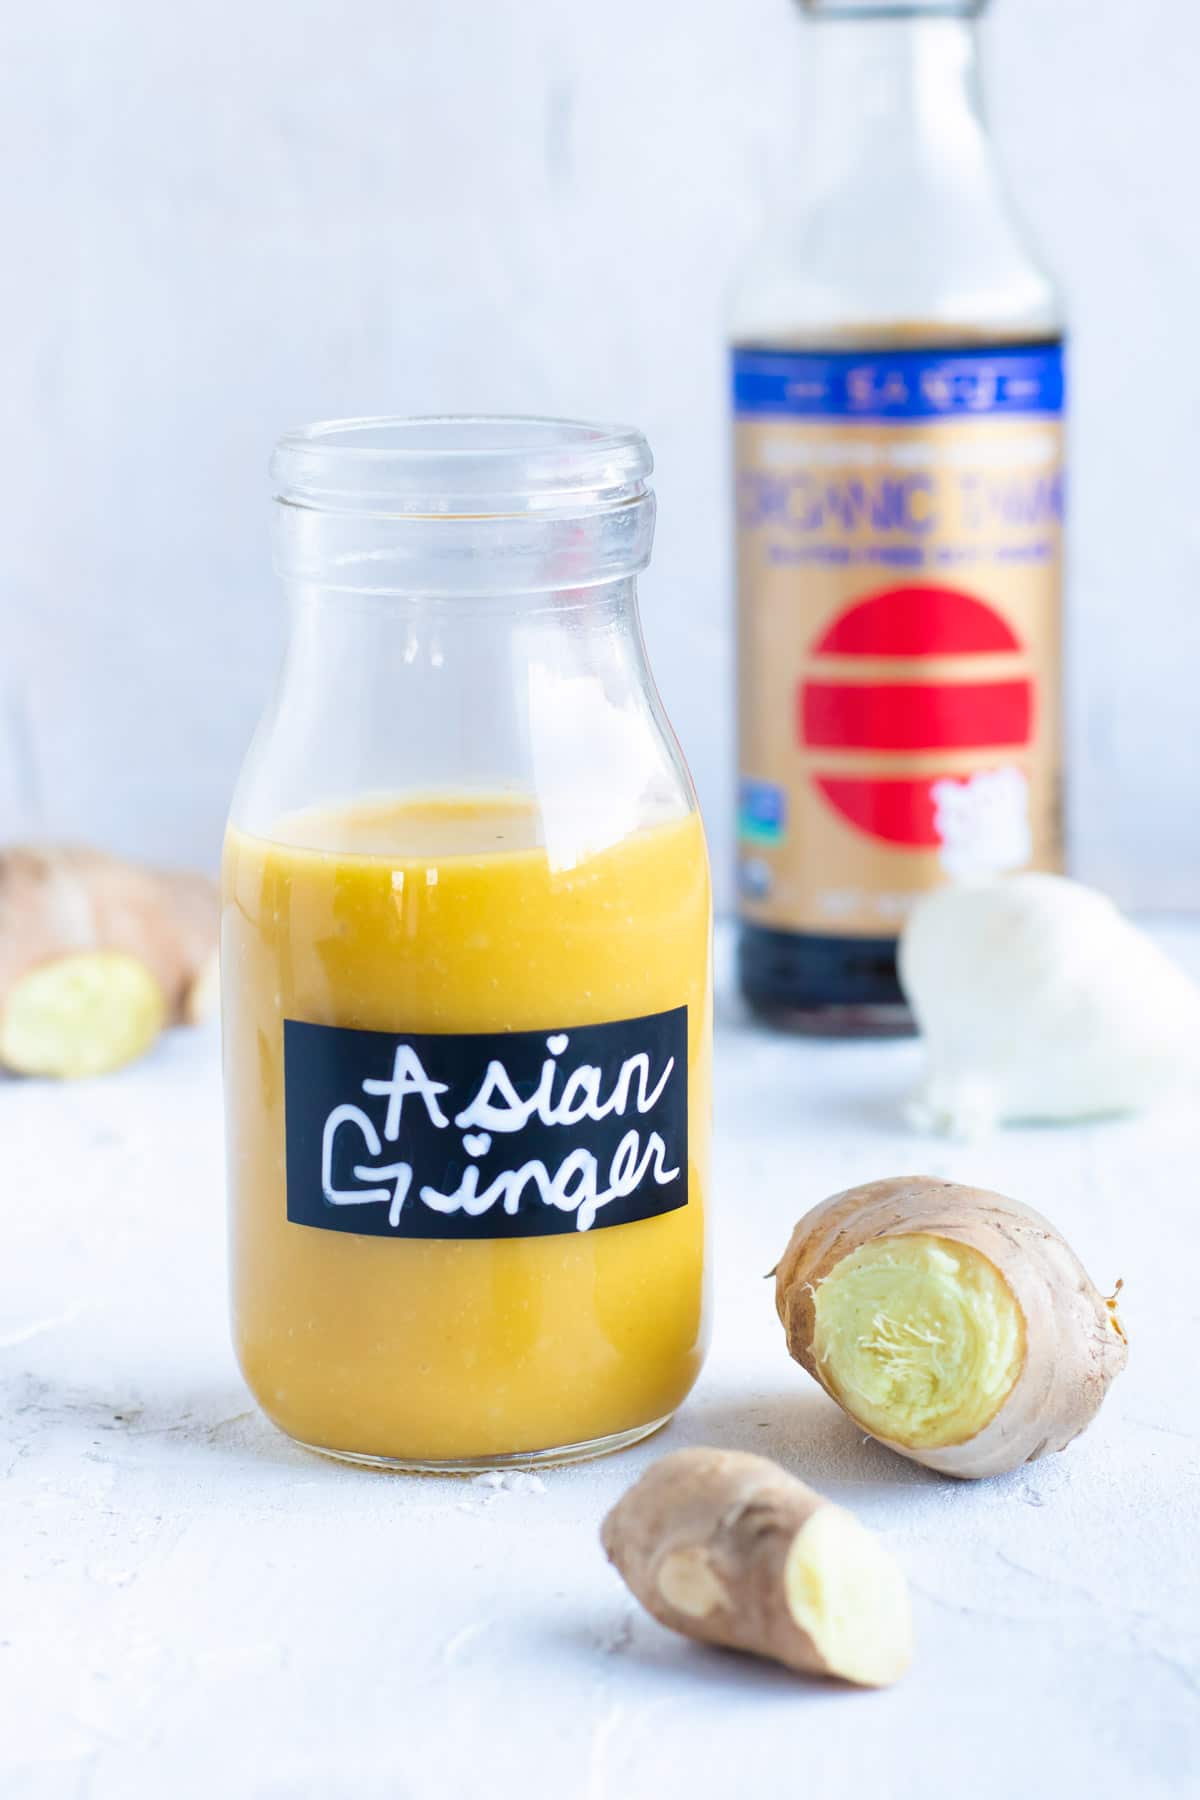 Asian Ginger salad dressing in a clear glass jar with fresh ginger and garlic next to it.